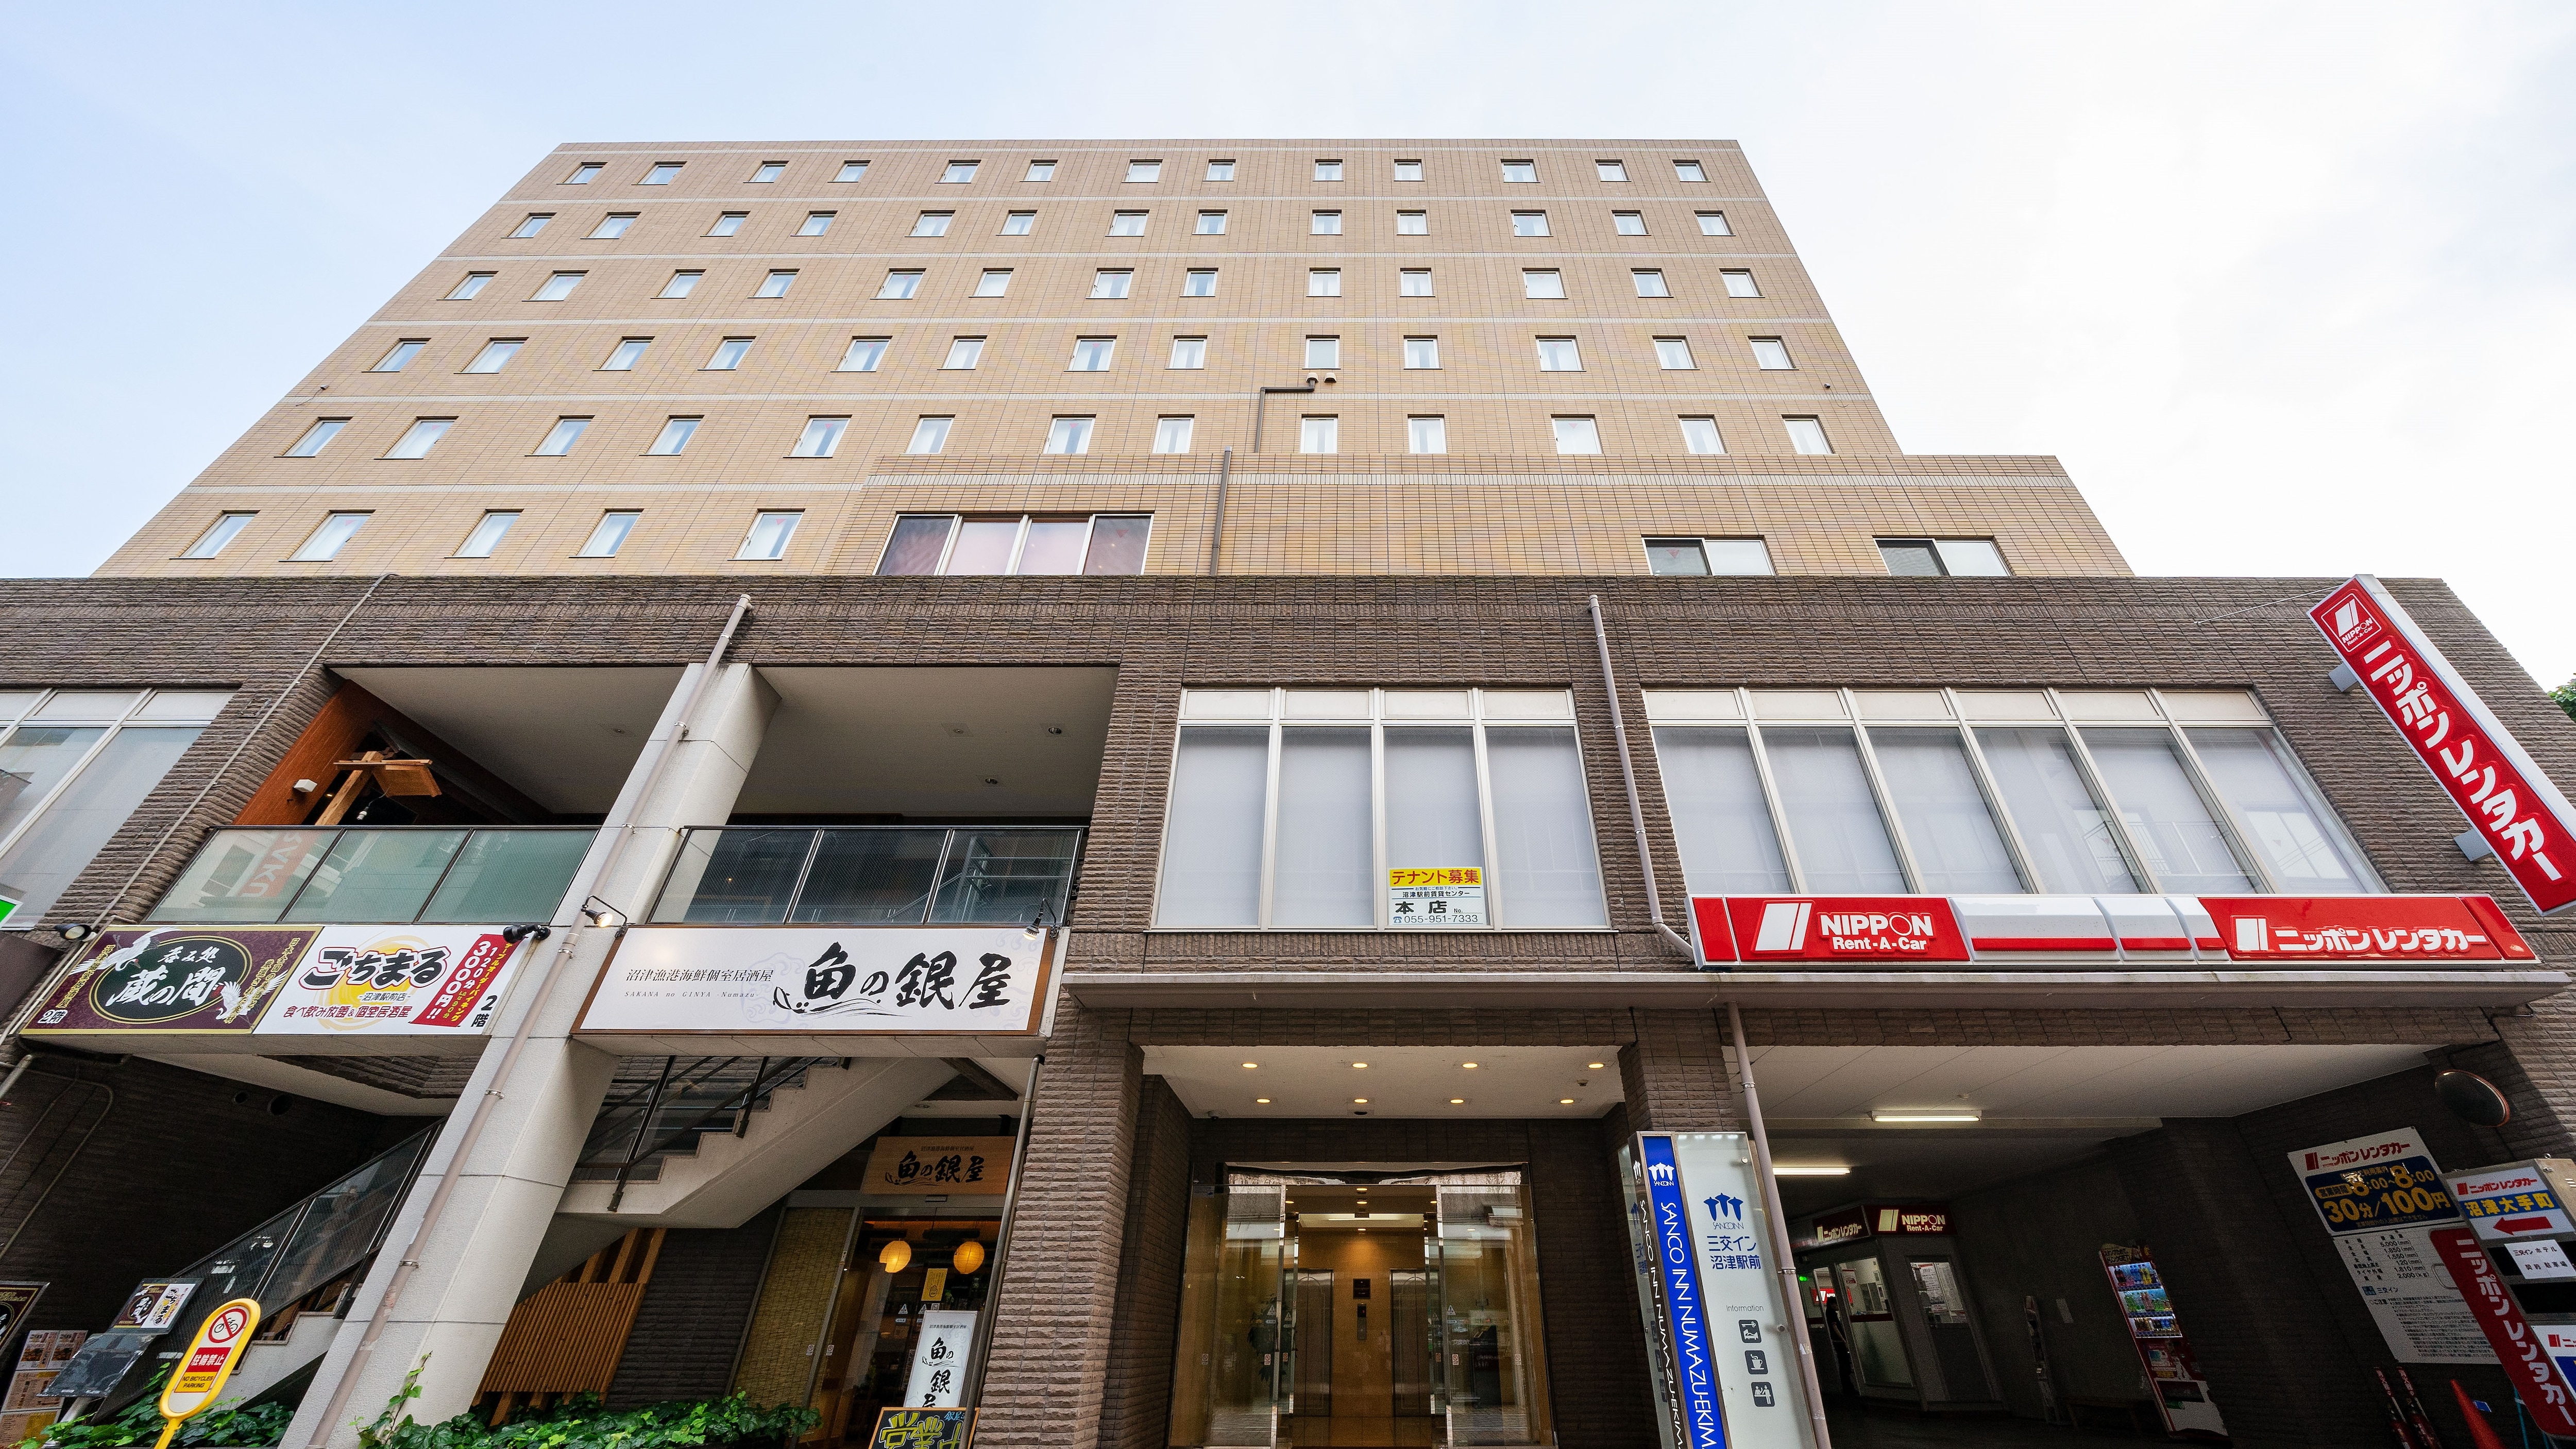 Exterior of the hotel (from the front): 2 minutes walk from the south exit of Numazu station!